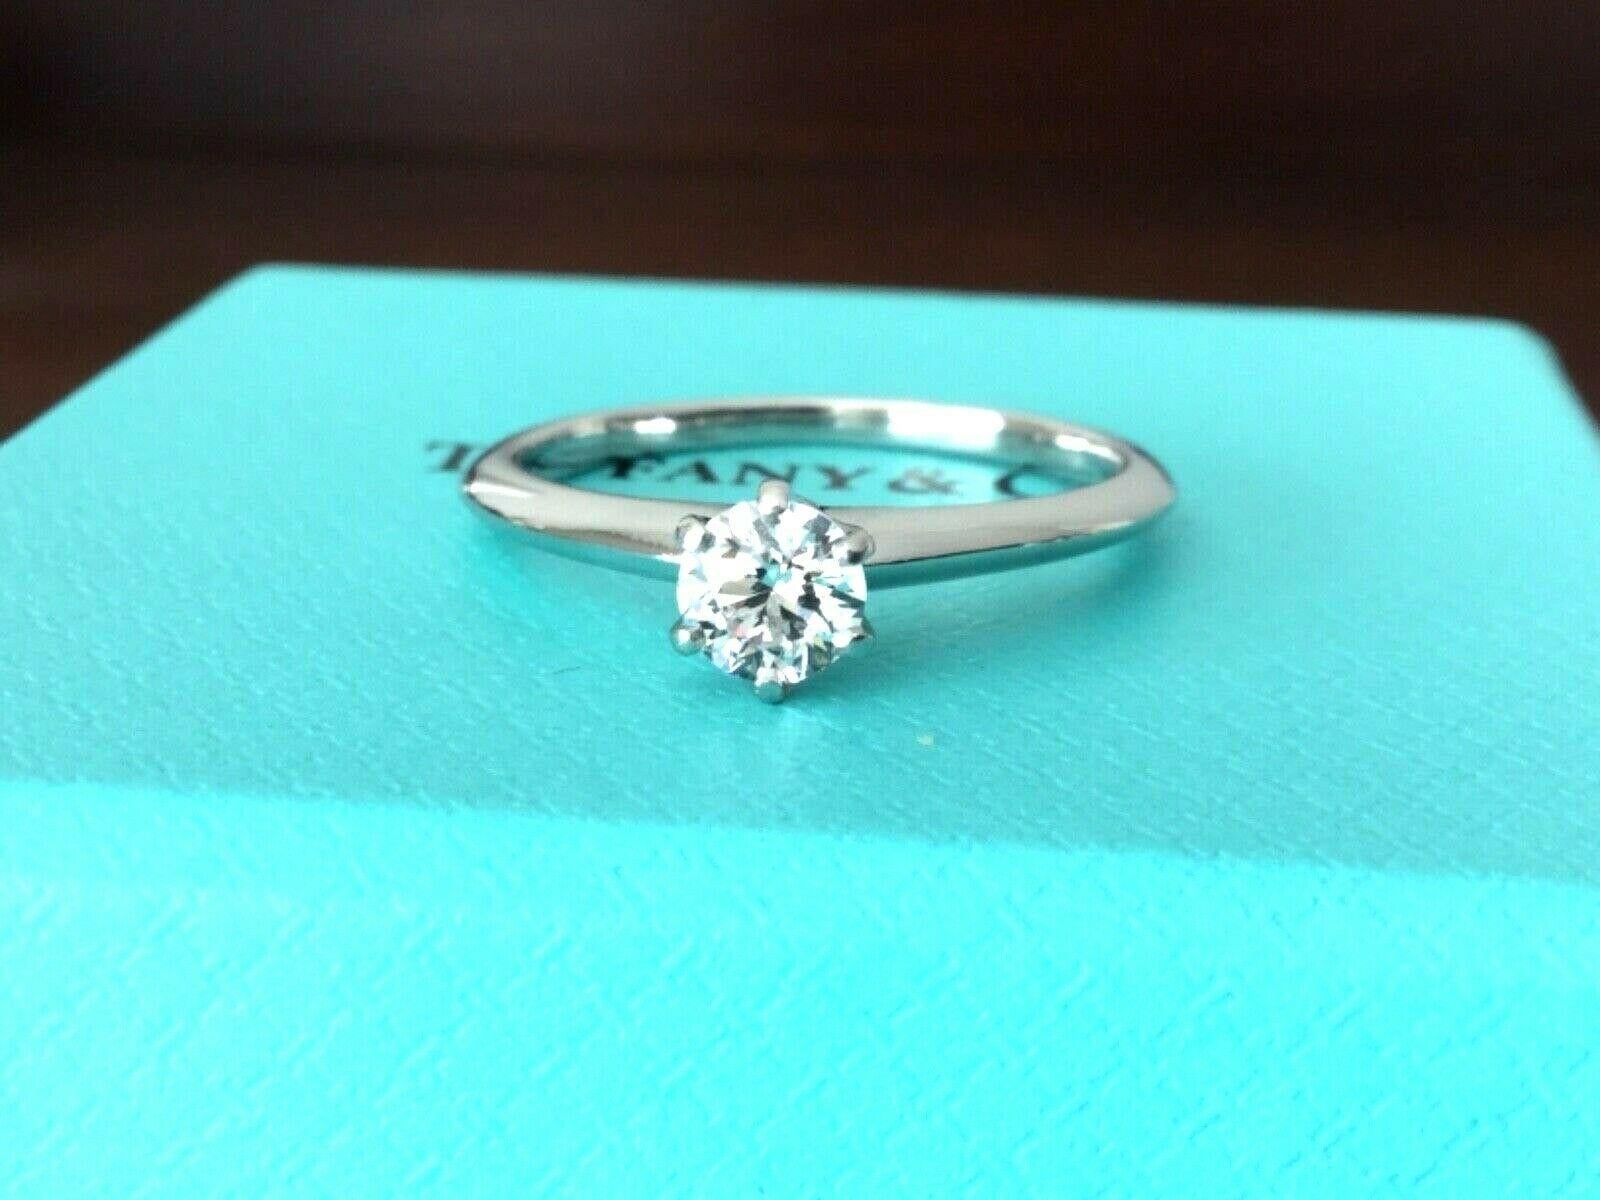 Being offered for your consideration is a like new Tiffany & Co Platinum and Diamond .46 carat natural round engagement ring set in the classic 6 prong setting. 

The ring has been professionally cleaned and polished to like new condition and